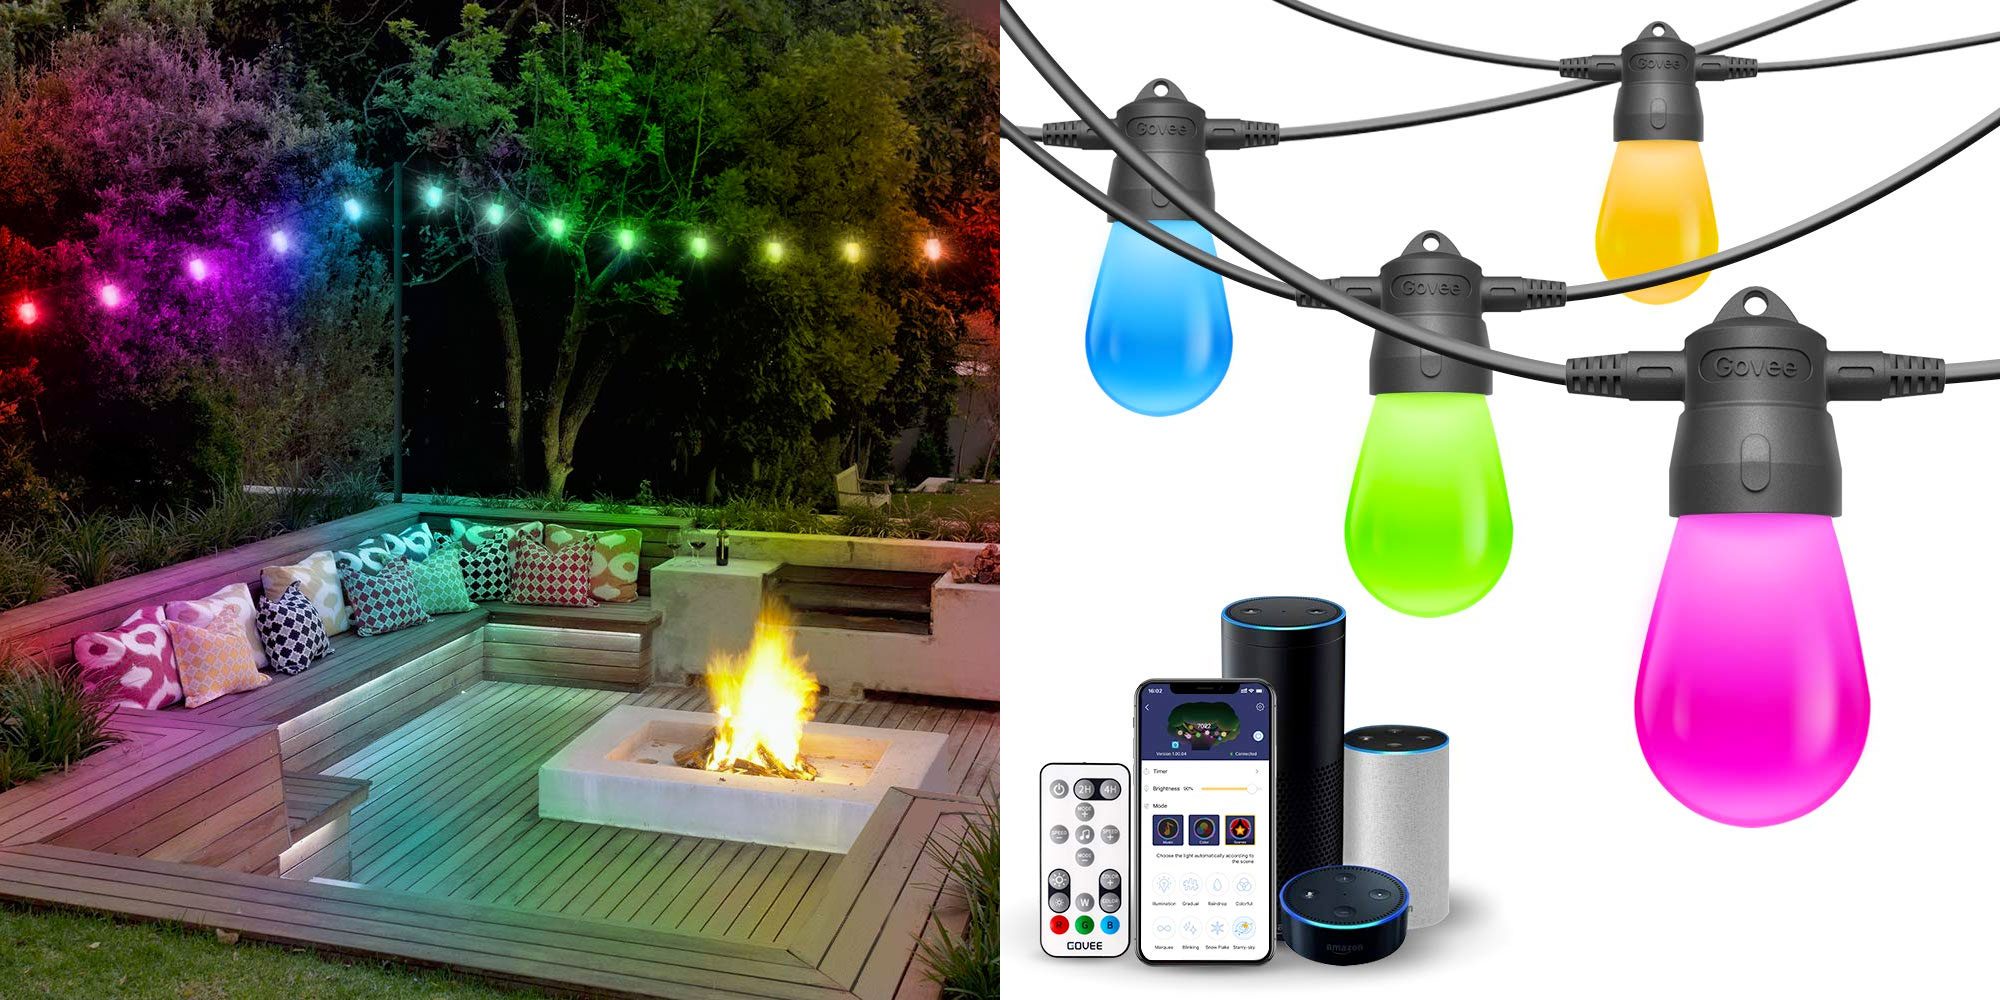 Save 40% on this Alexa/Assistant RGB LED outdoor string light kit, now ...